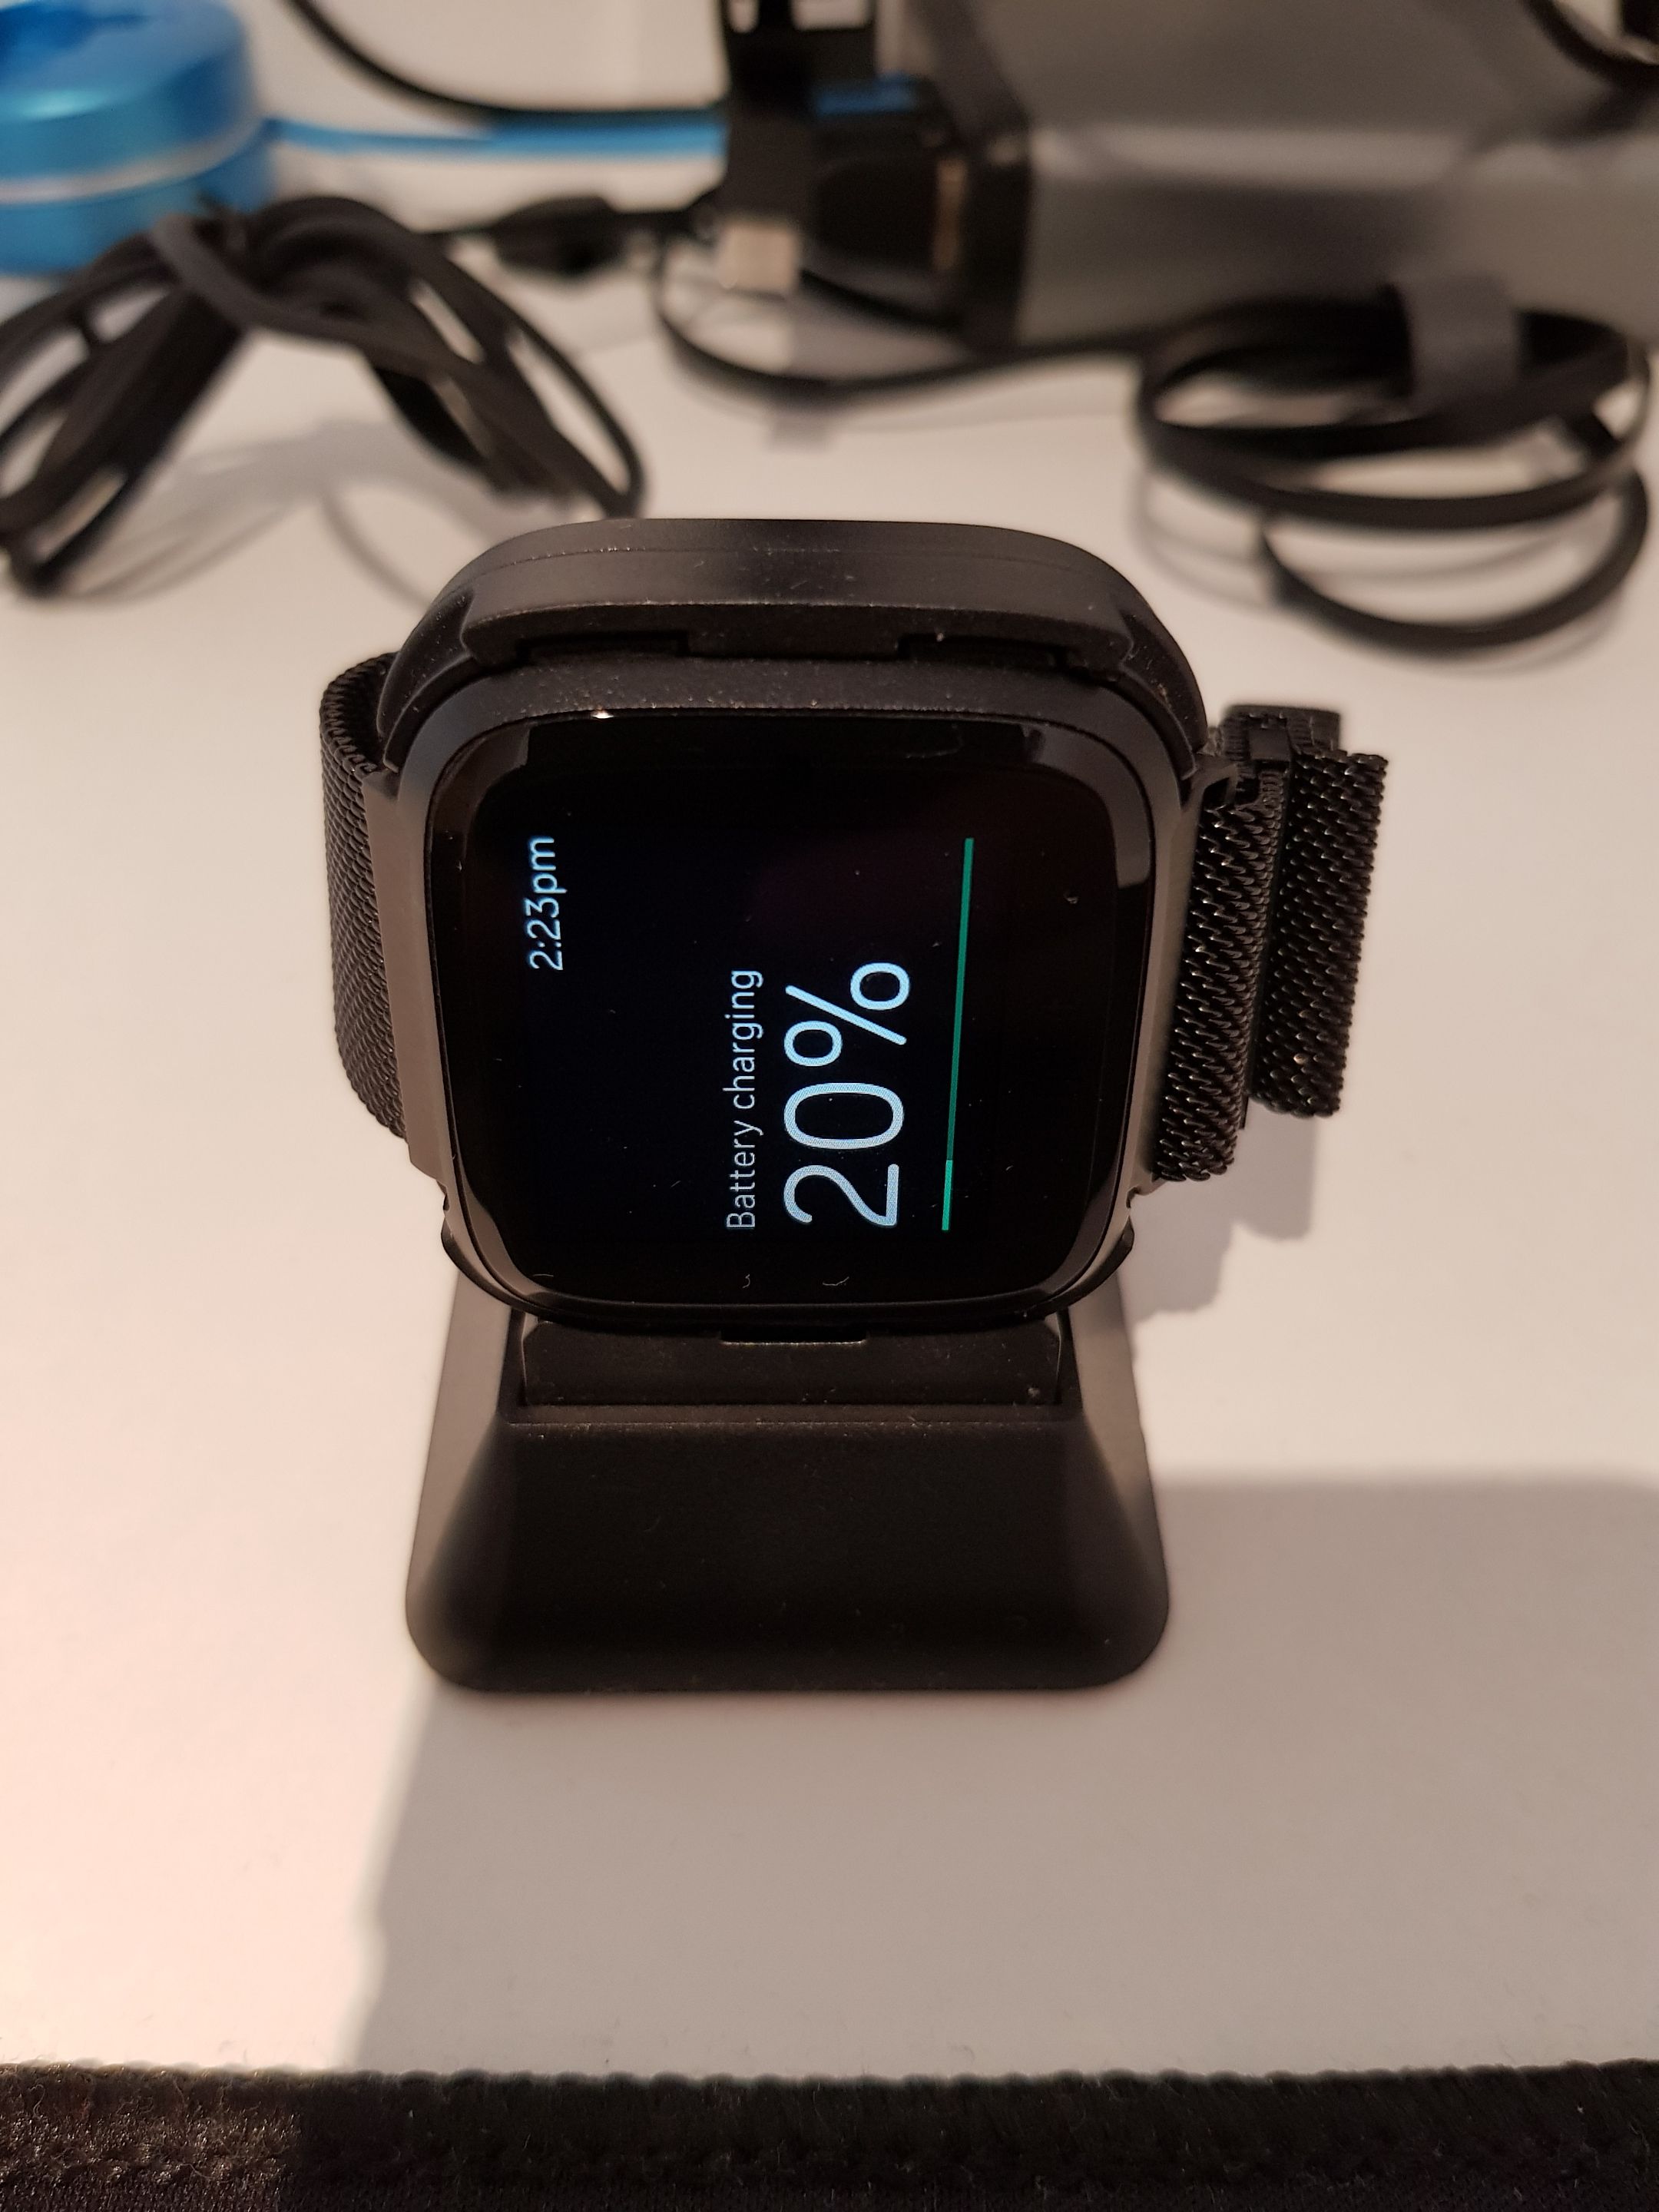 fitbit versa stopped charging